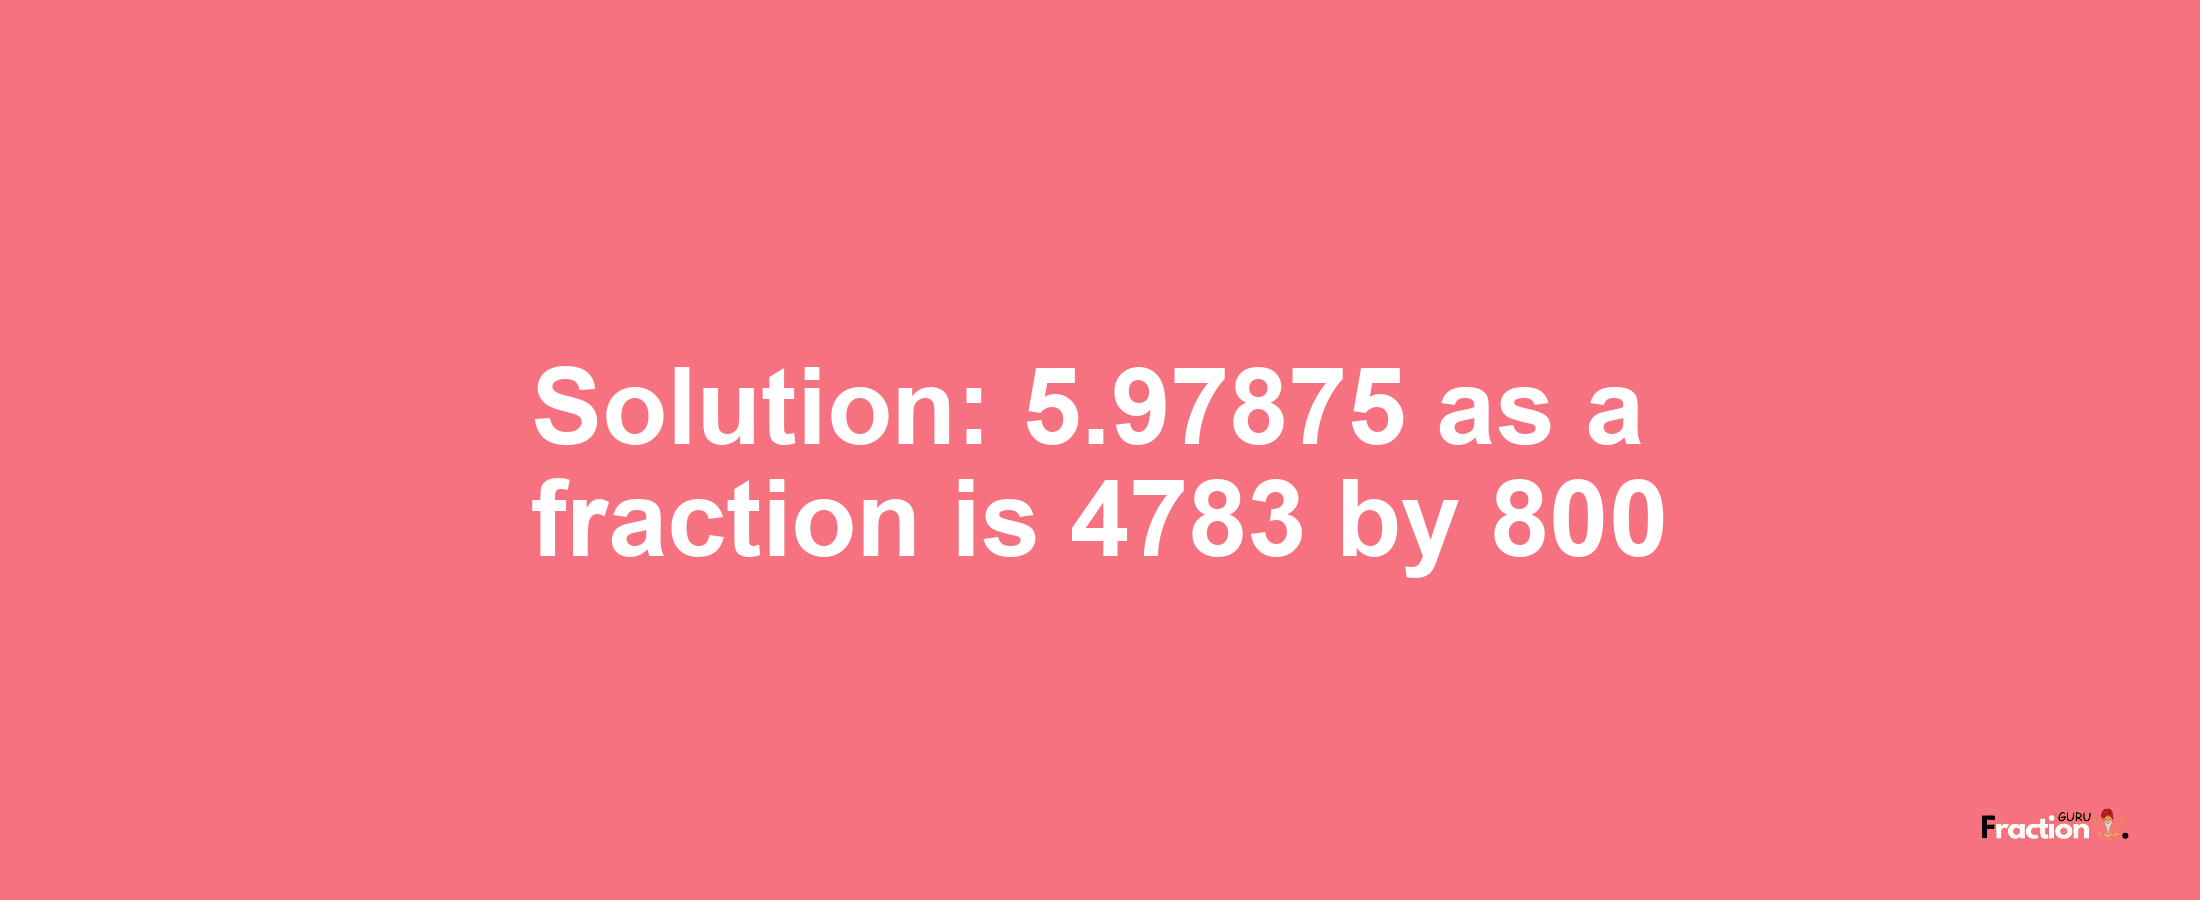 Solution:5.97875 as a fraction is 4783/800